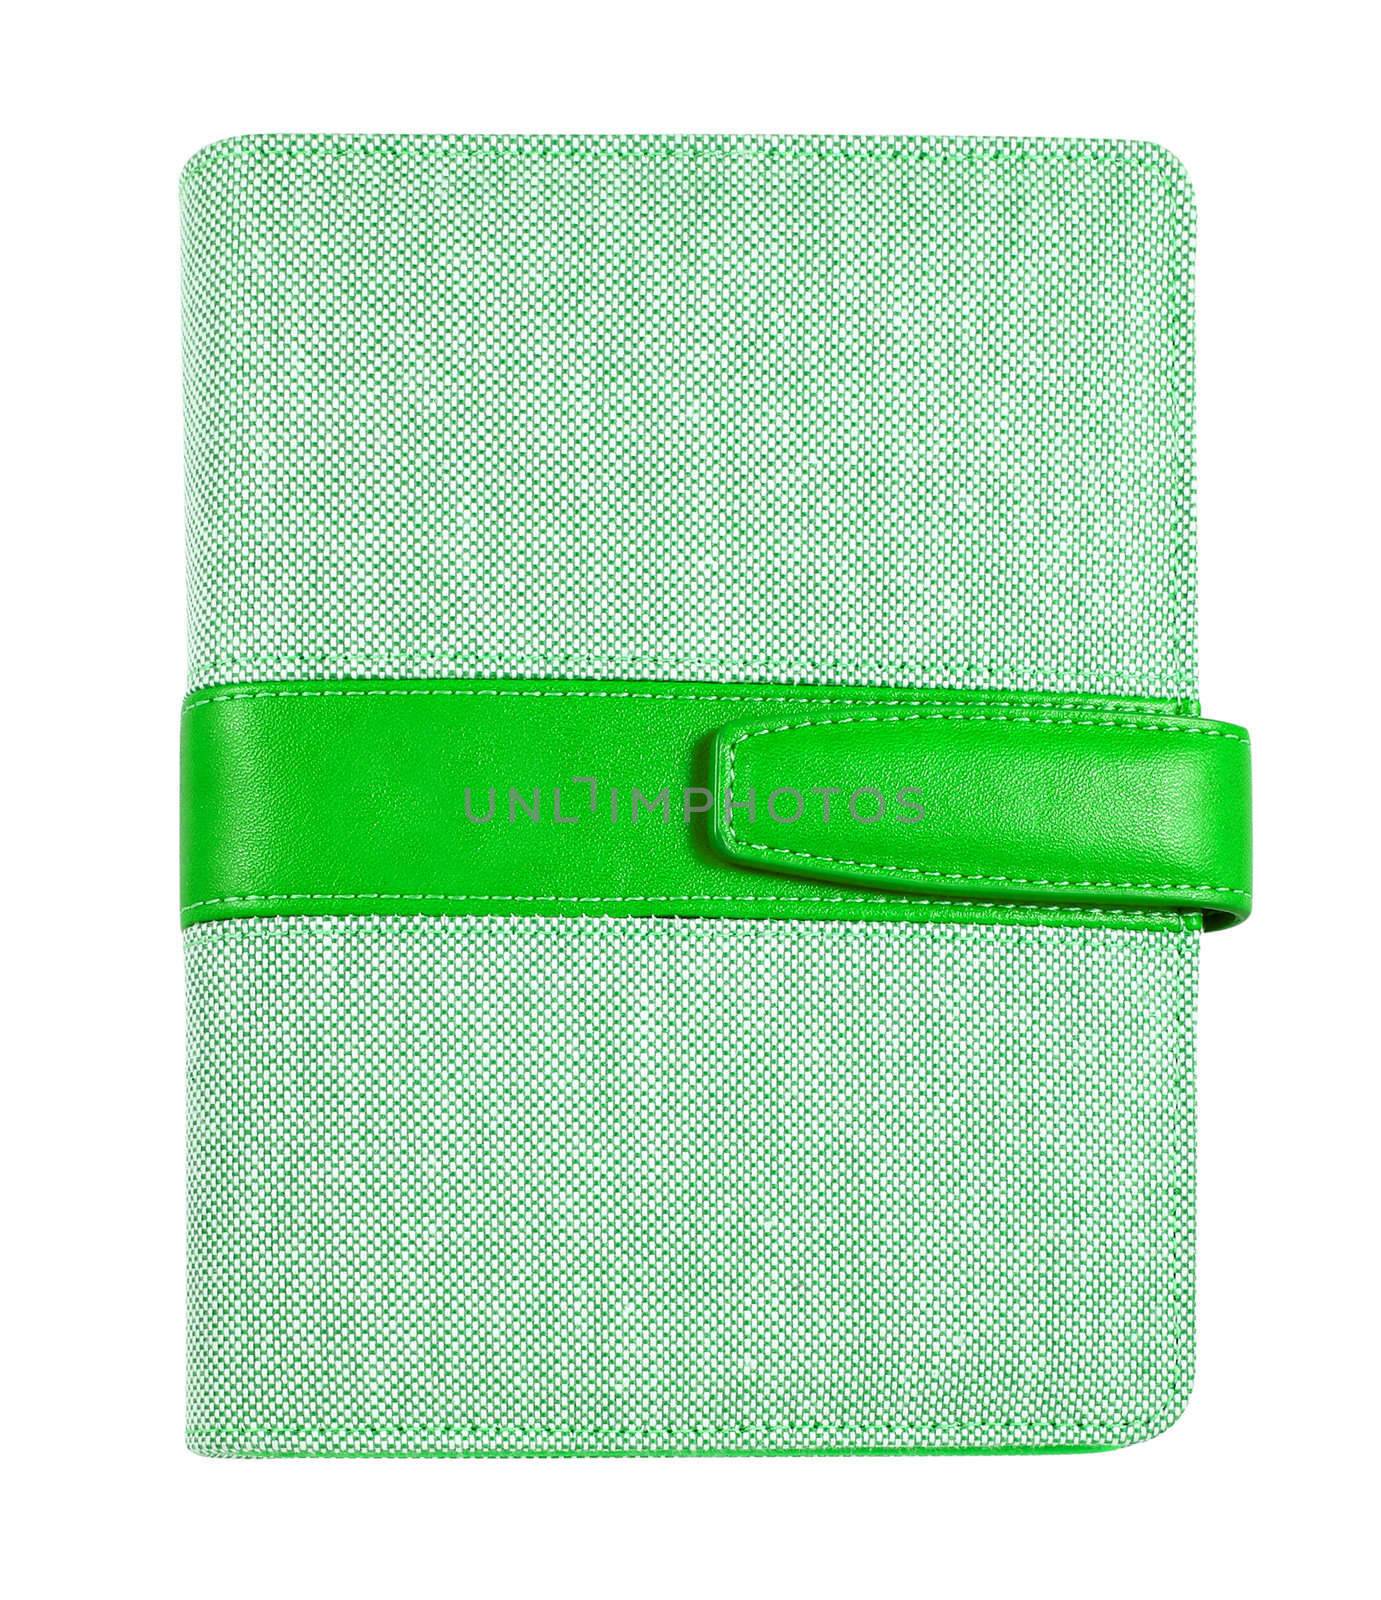 Green leather and canvas cover notebook isolated on white 